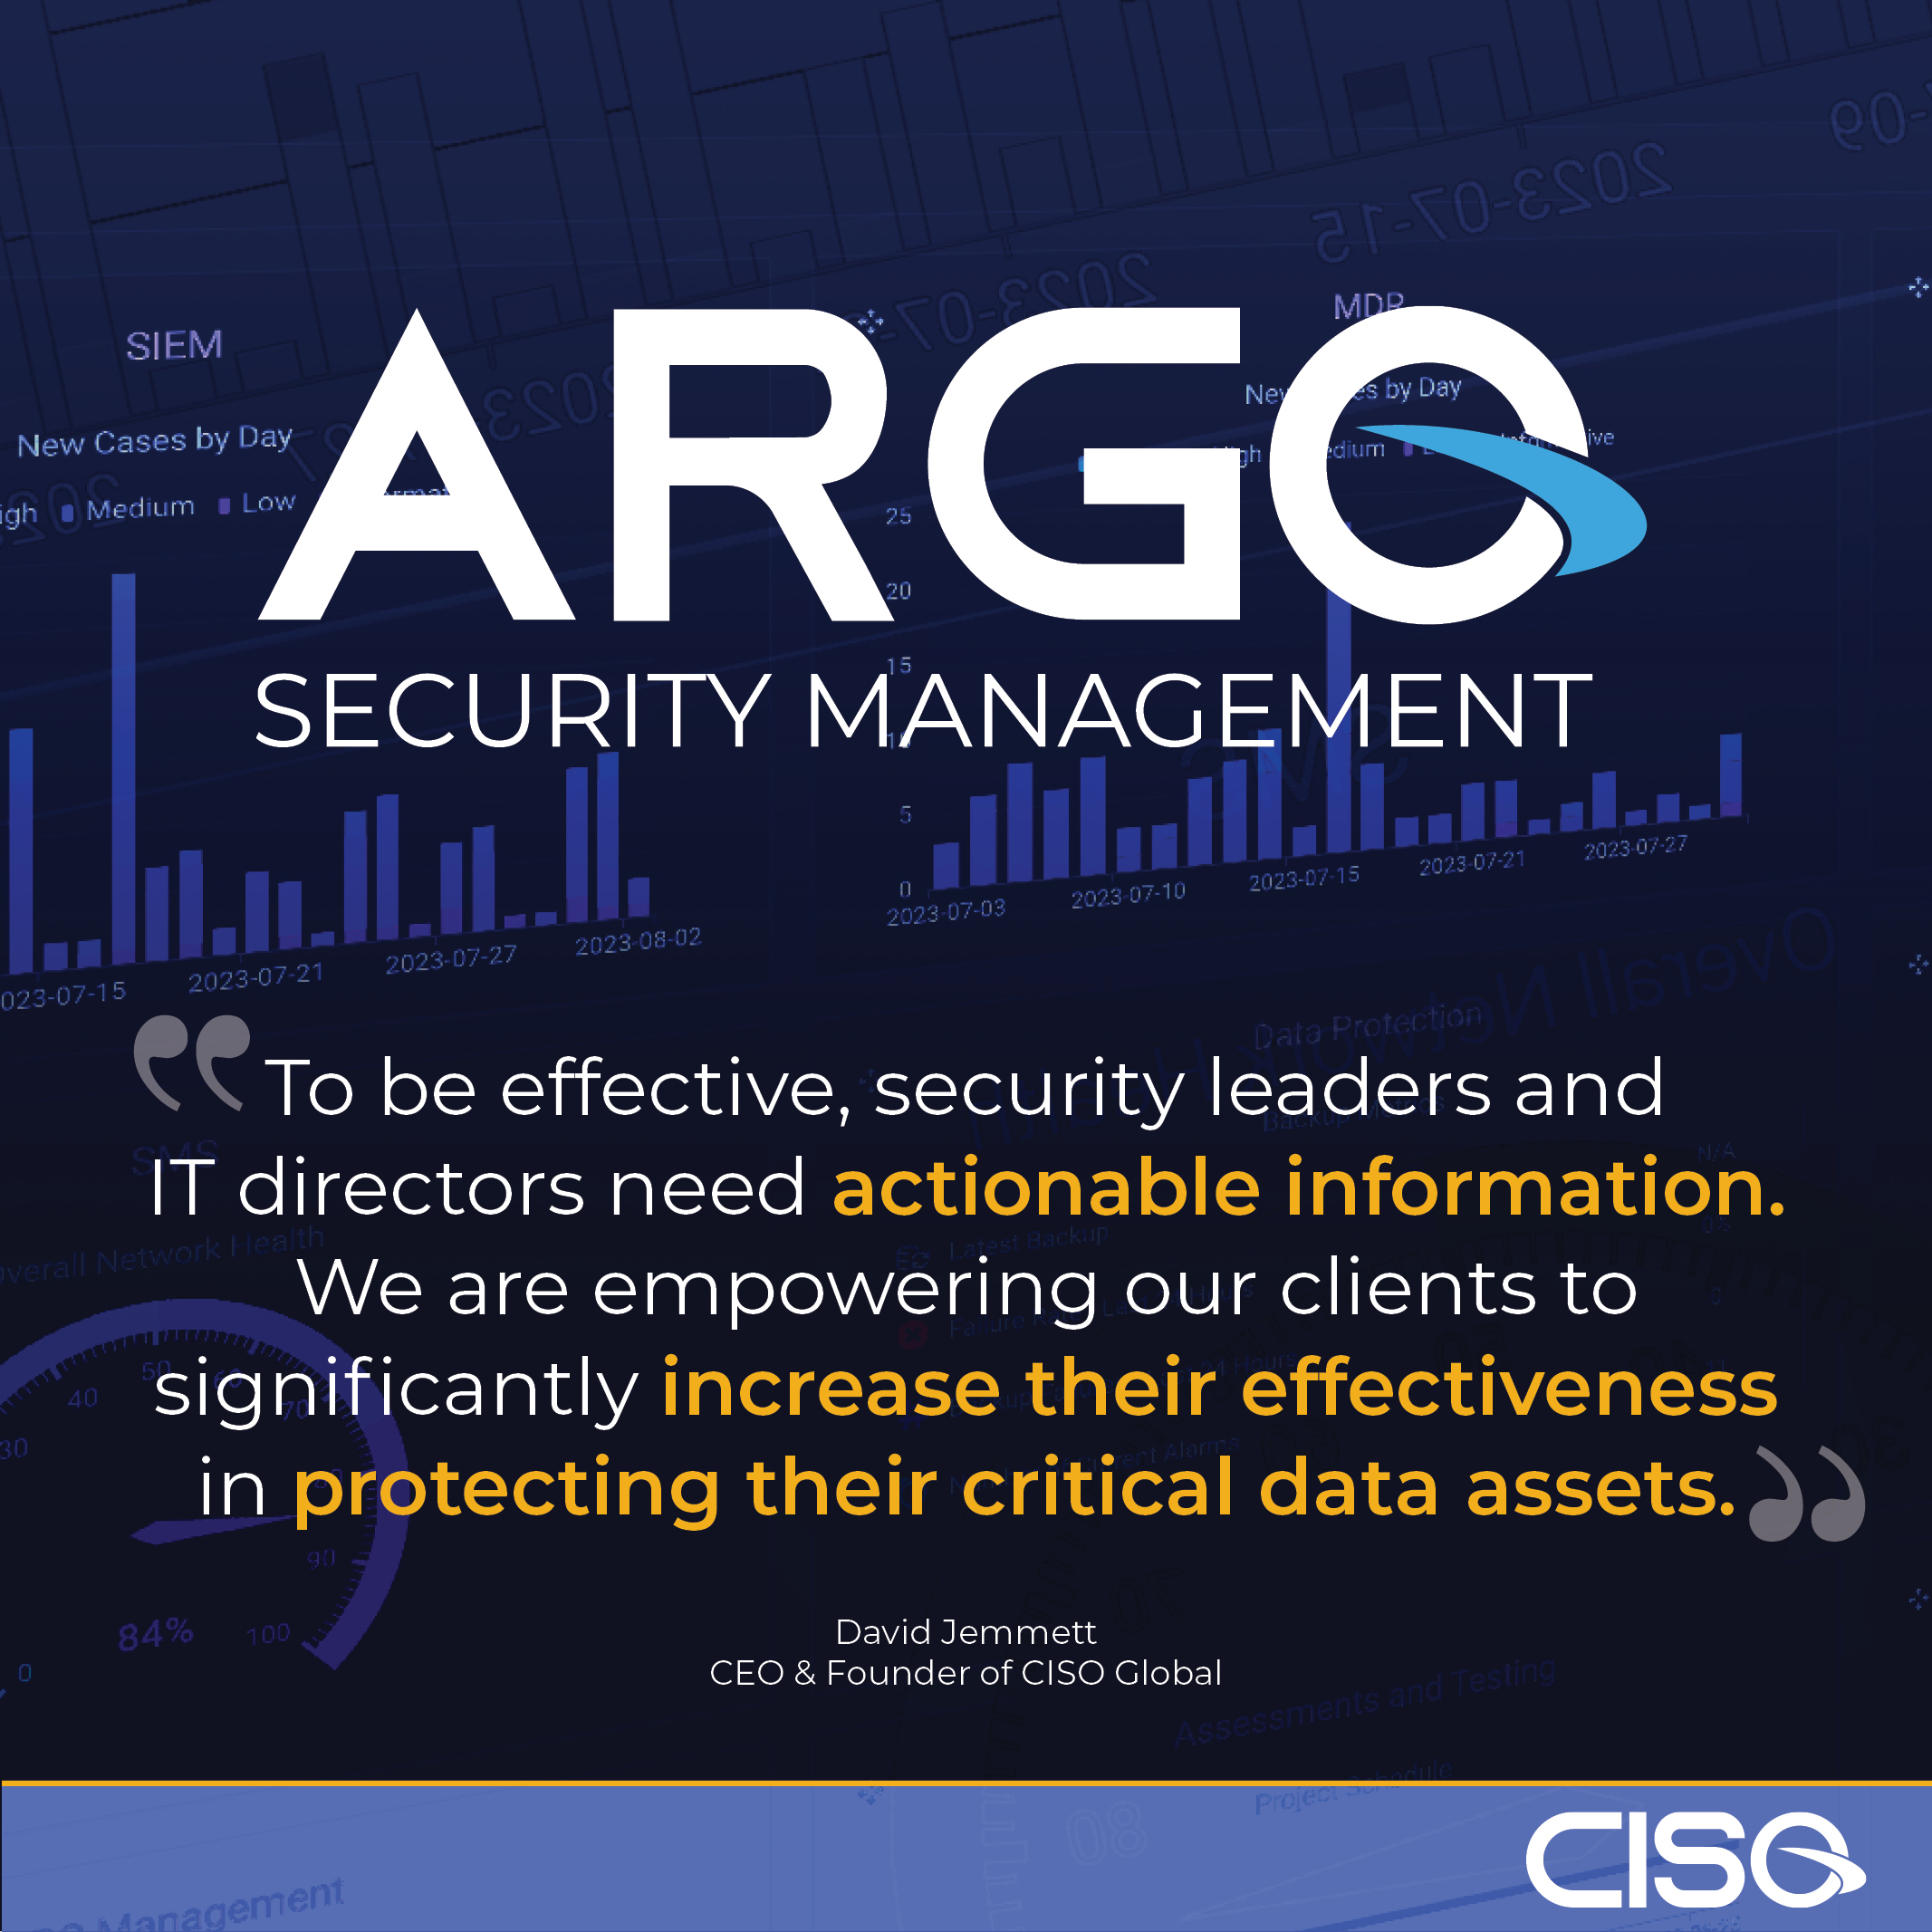 CISO Global Bolsters Its Security Management Platform Argo To Improve Real-Time Security Decision Making for Enterprises